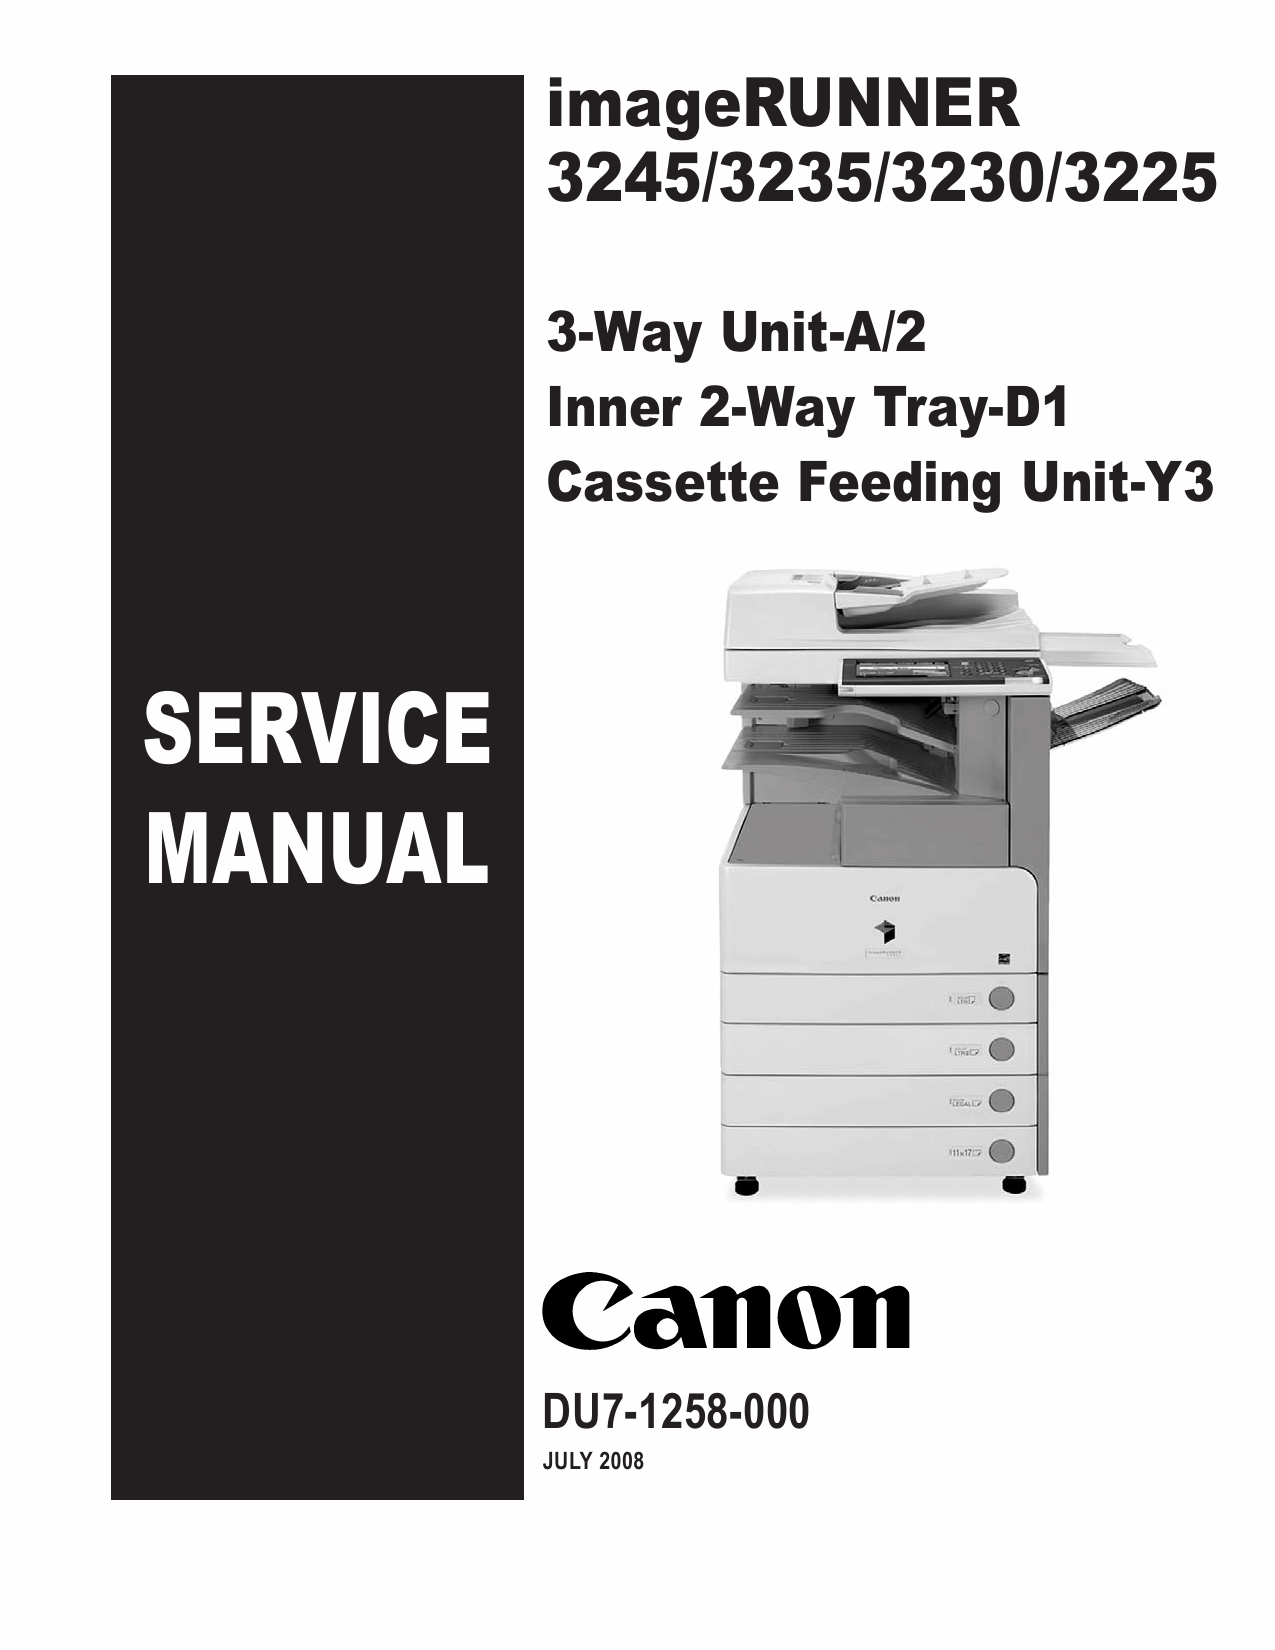 Canon imageRUNNER iR-3245 3235 3230 3225 Parts and Service Manual-1